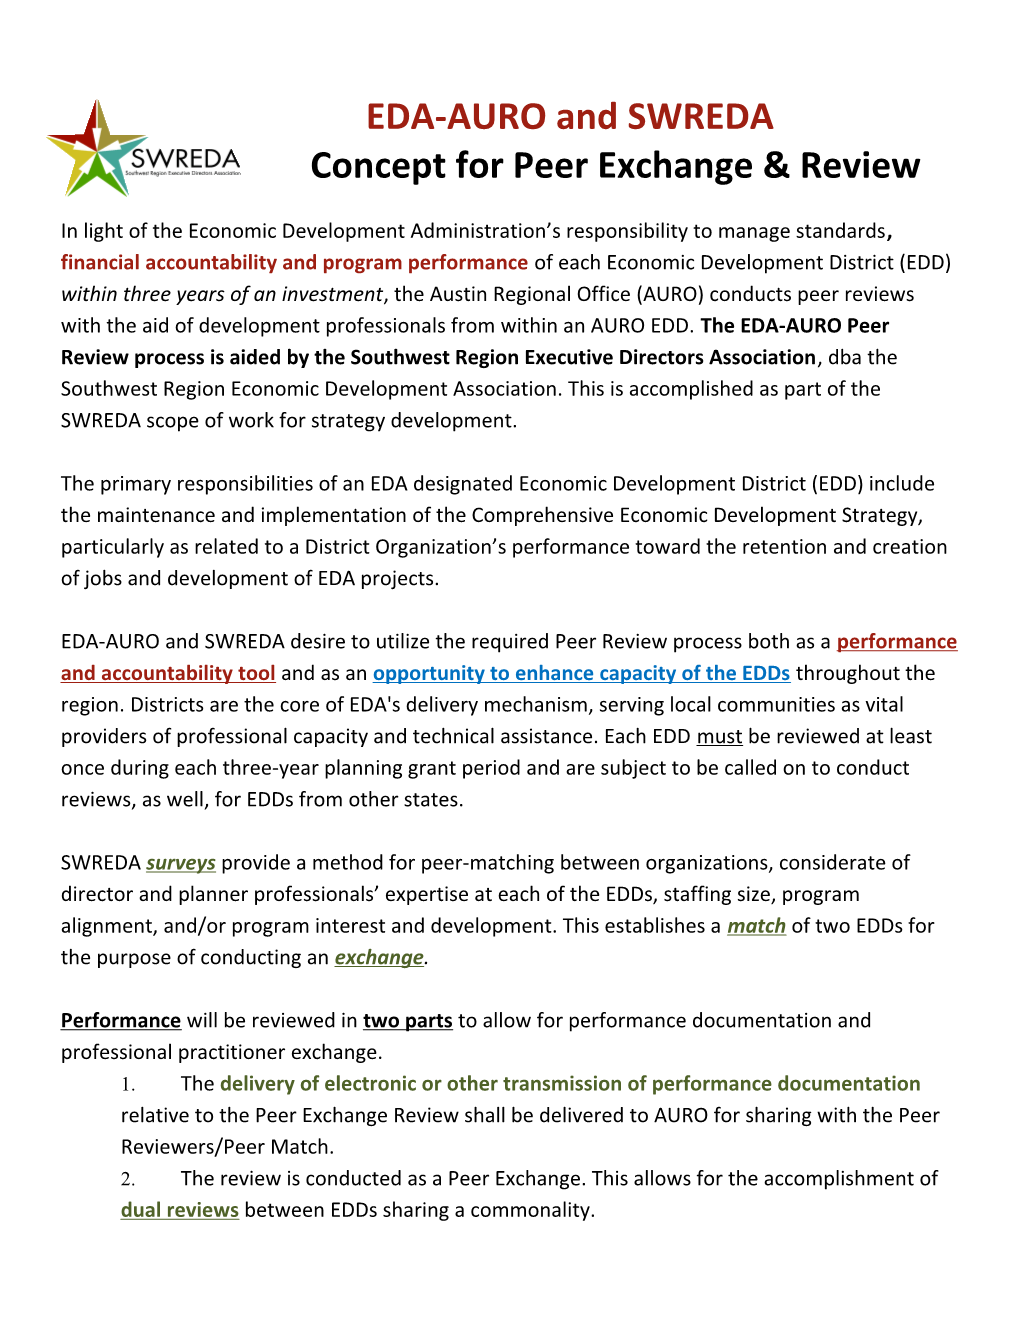 Concept for Peer Exchange & Review